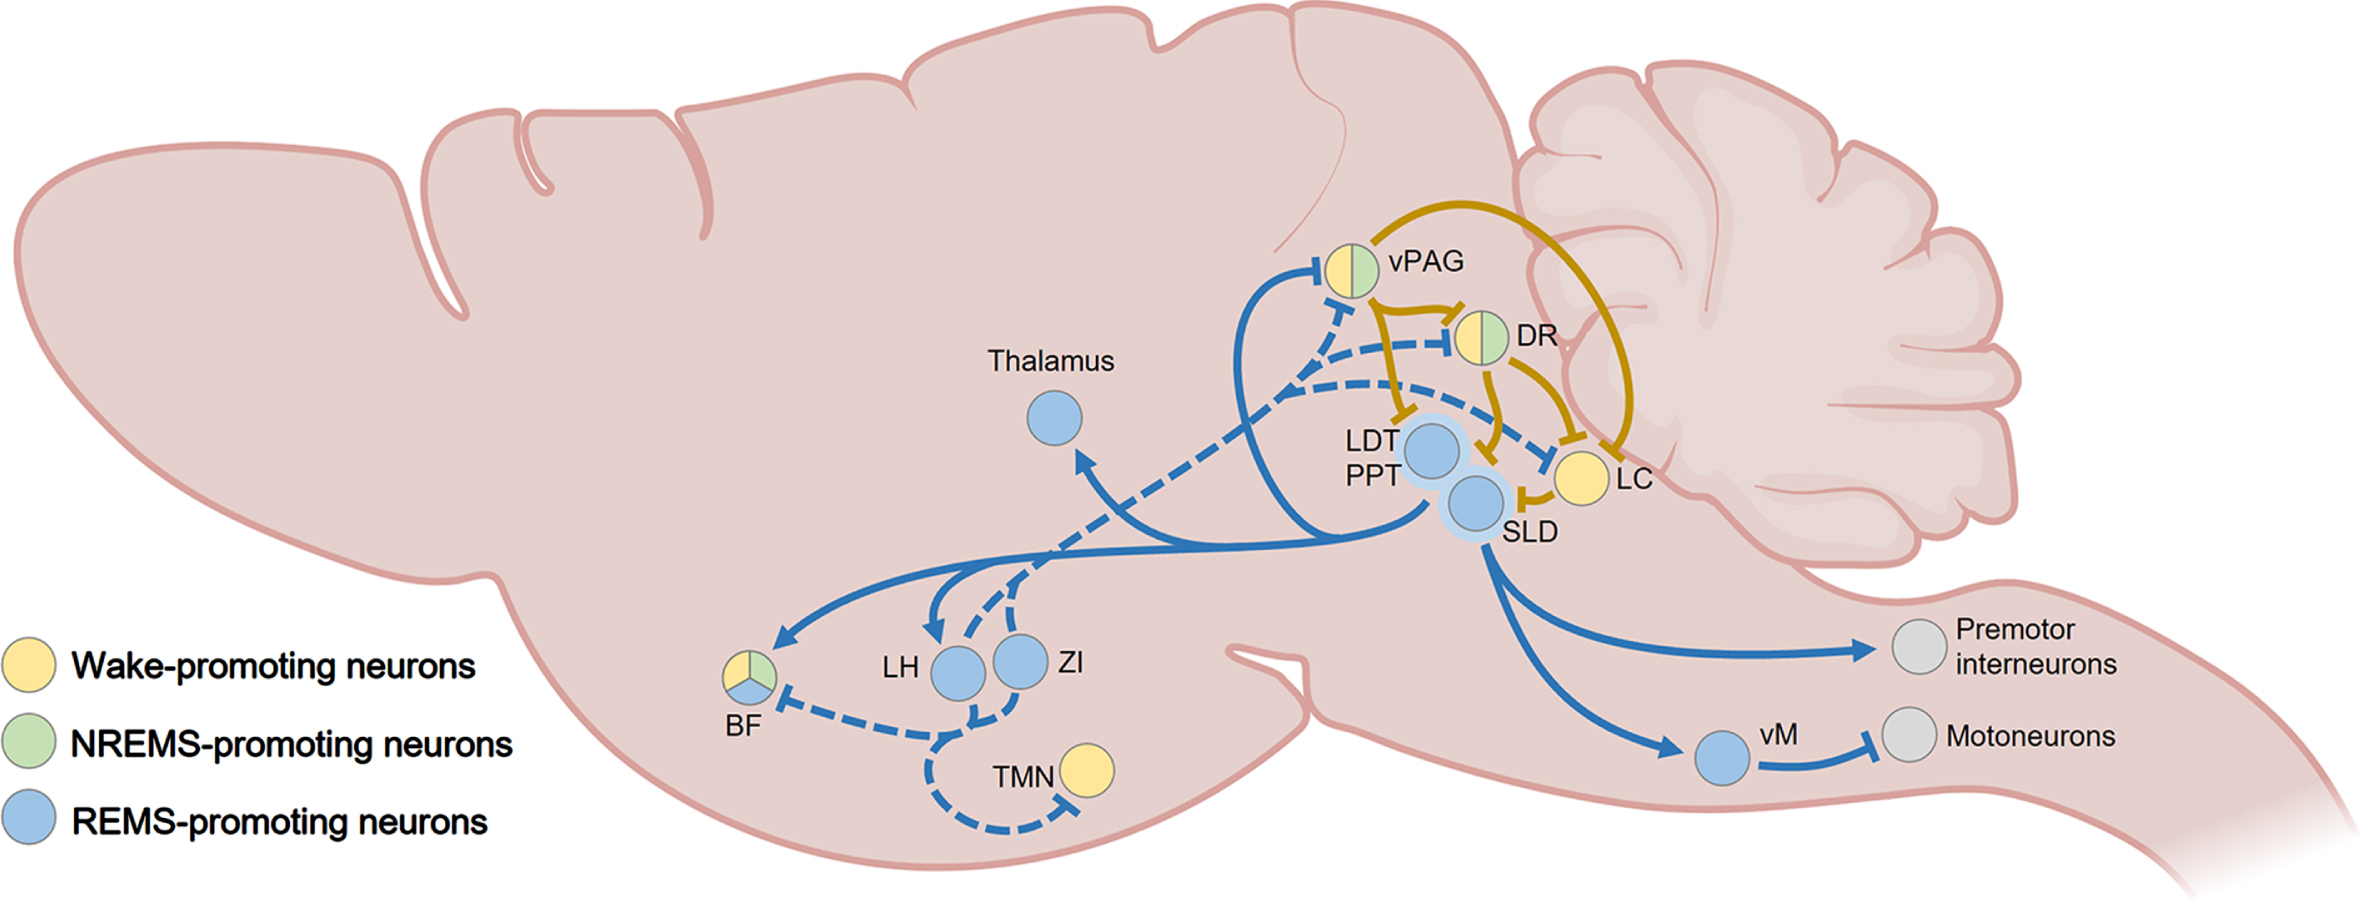 Summary of REMS-promoting pathways in the rodent brain. Glutamatergic, GABAergic, and cholinergic neurons from the PPT, LDT, and SLD, located in the pons, are principally responsible for the generation of REMS through projections to the thalamus, LH, and BF. They also suppress REMS-associated muscle activity through direct and indirect (via the vM) connections to spinal cord premotor interneurons and motoneurons, respectively. GABAergic and MCH-expressing neurons from the LH and ZI generate and maintain REMS by inhibiting wake-active and/or REMS-suppressing neuronal clusters in the BF, TMN, vPAG, LC, and DR (dashed lines). REMS is negatively modulated by interconnected midbrain nuclei such as the vPAG, DR, and LC that inhibit the PPT, LDT, and SLD. BF, basal forebrain; DR, dorsal raphe; LC, locus coeruleus; LDT, laterodorsal tegmental nucleus; LH, lateral hypothalamus; MCH, melanin concentrating hormone; PPT, pedunculopontine tegmental nucleus; SLD, sublaterodorsal tegmental nucleus; TMN, tuberomammillary nucleus of the hypothalamus; vM, vental medulla; vPAG, ventral periaqueductal gray; ZI, zona incerta. Created with BioRender.com.